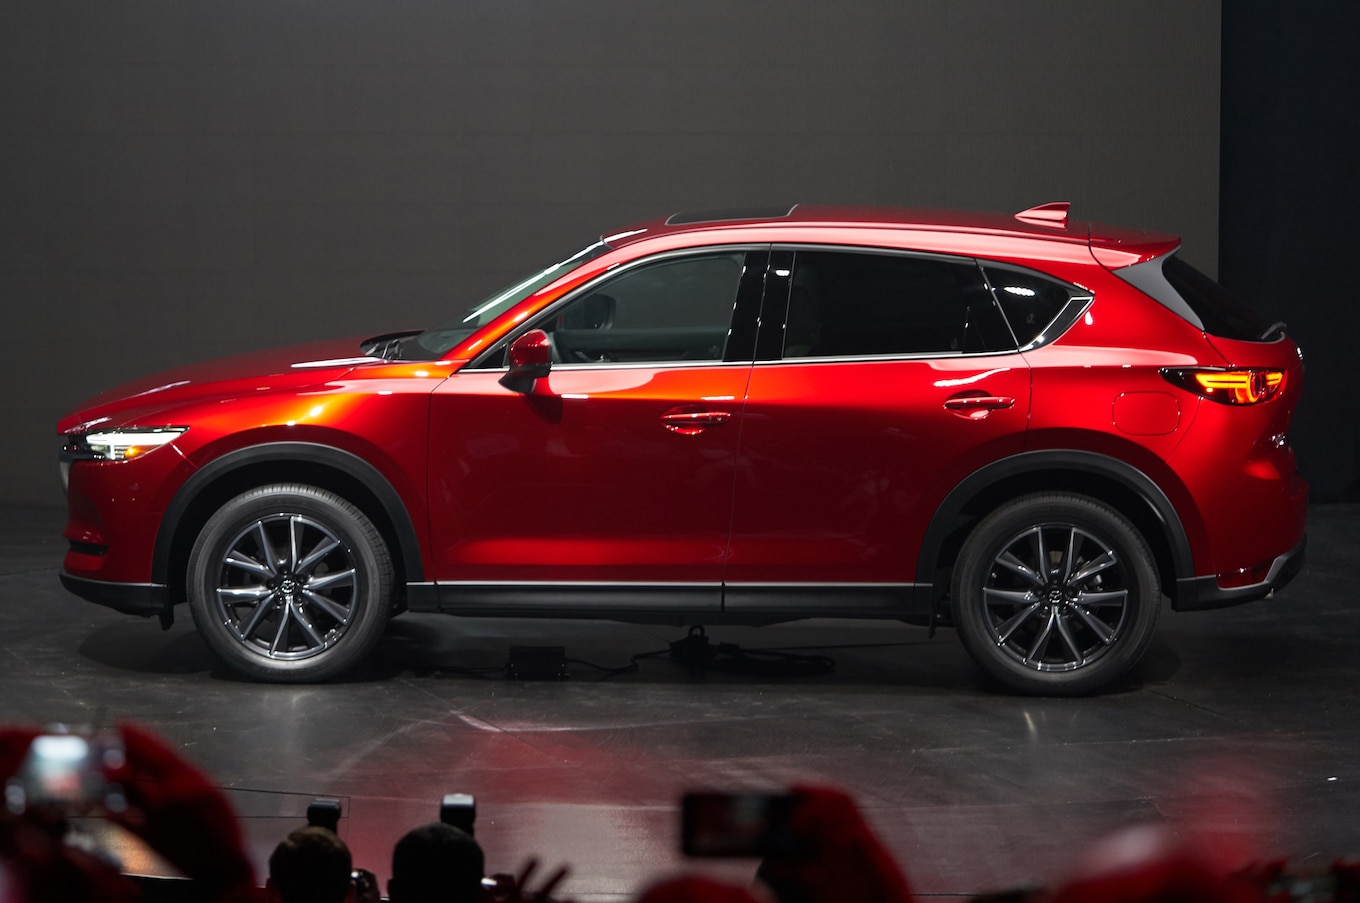 2017-Mazda-CX-5-side-view-on-stage.jpg